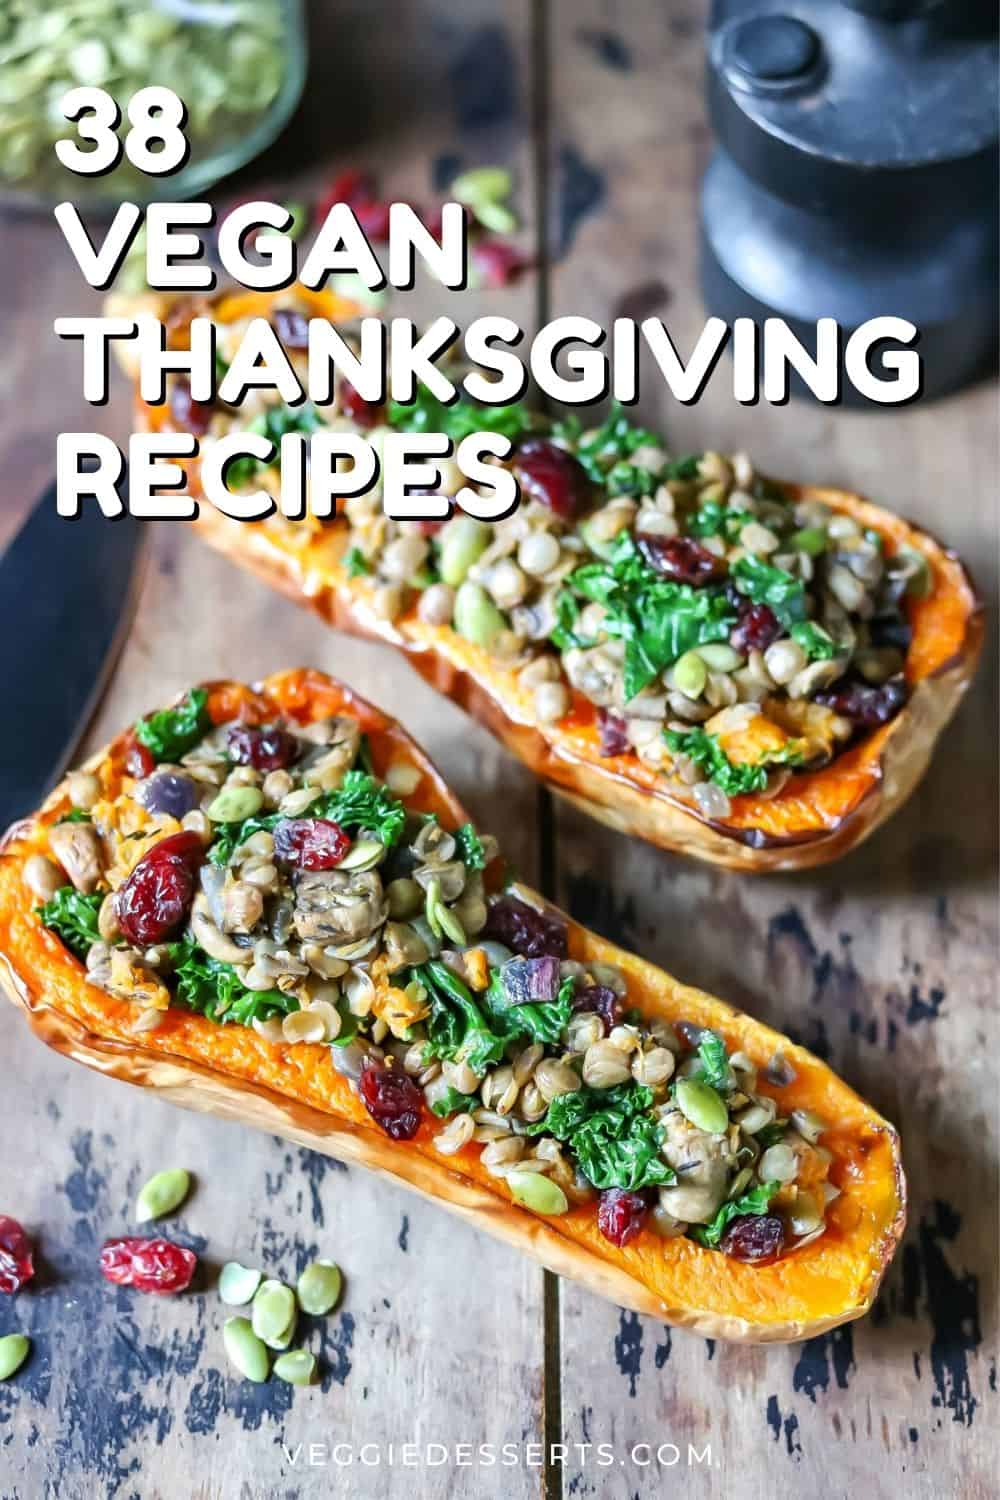 Stuffed squash on a table, with text: 38 Vegan Thanksgiving Recipes